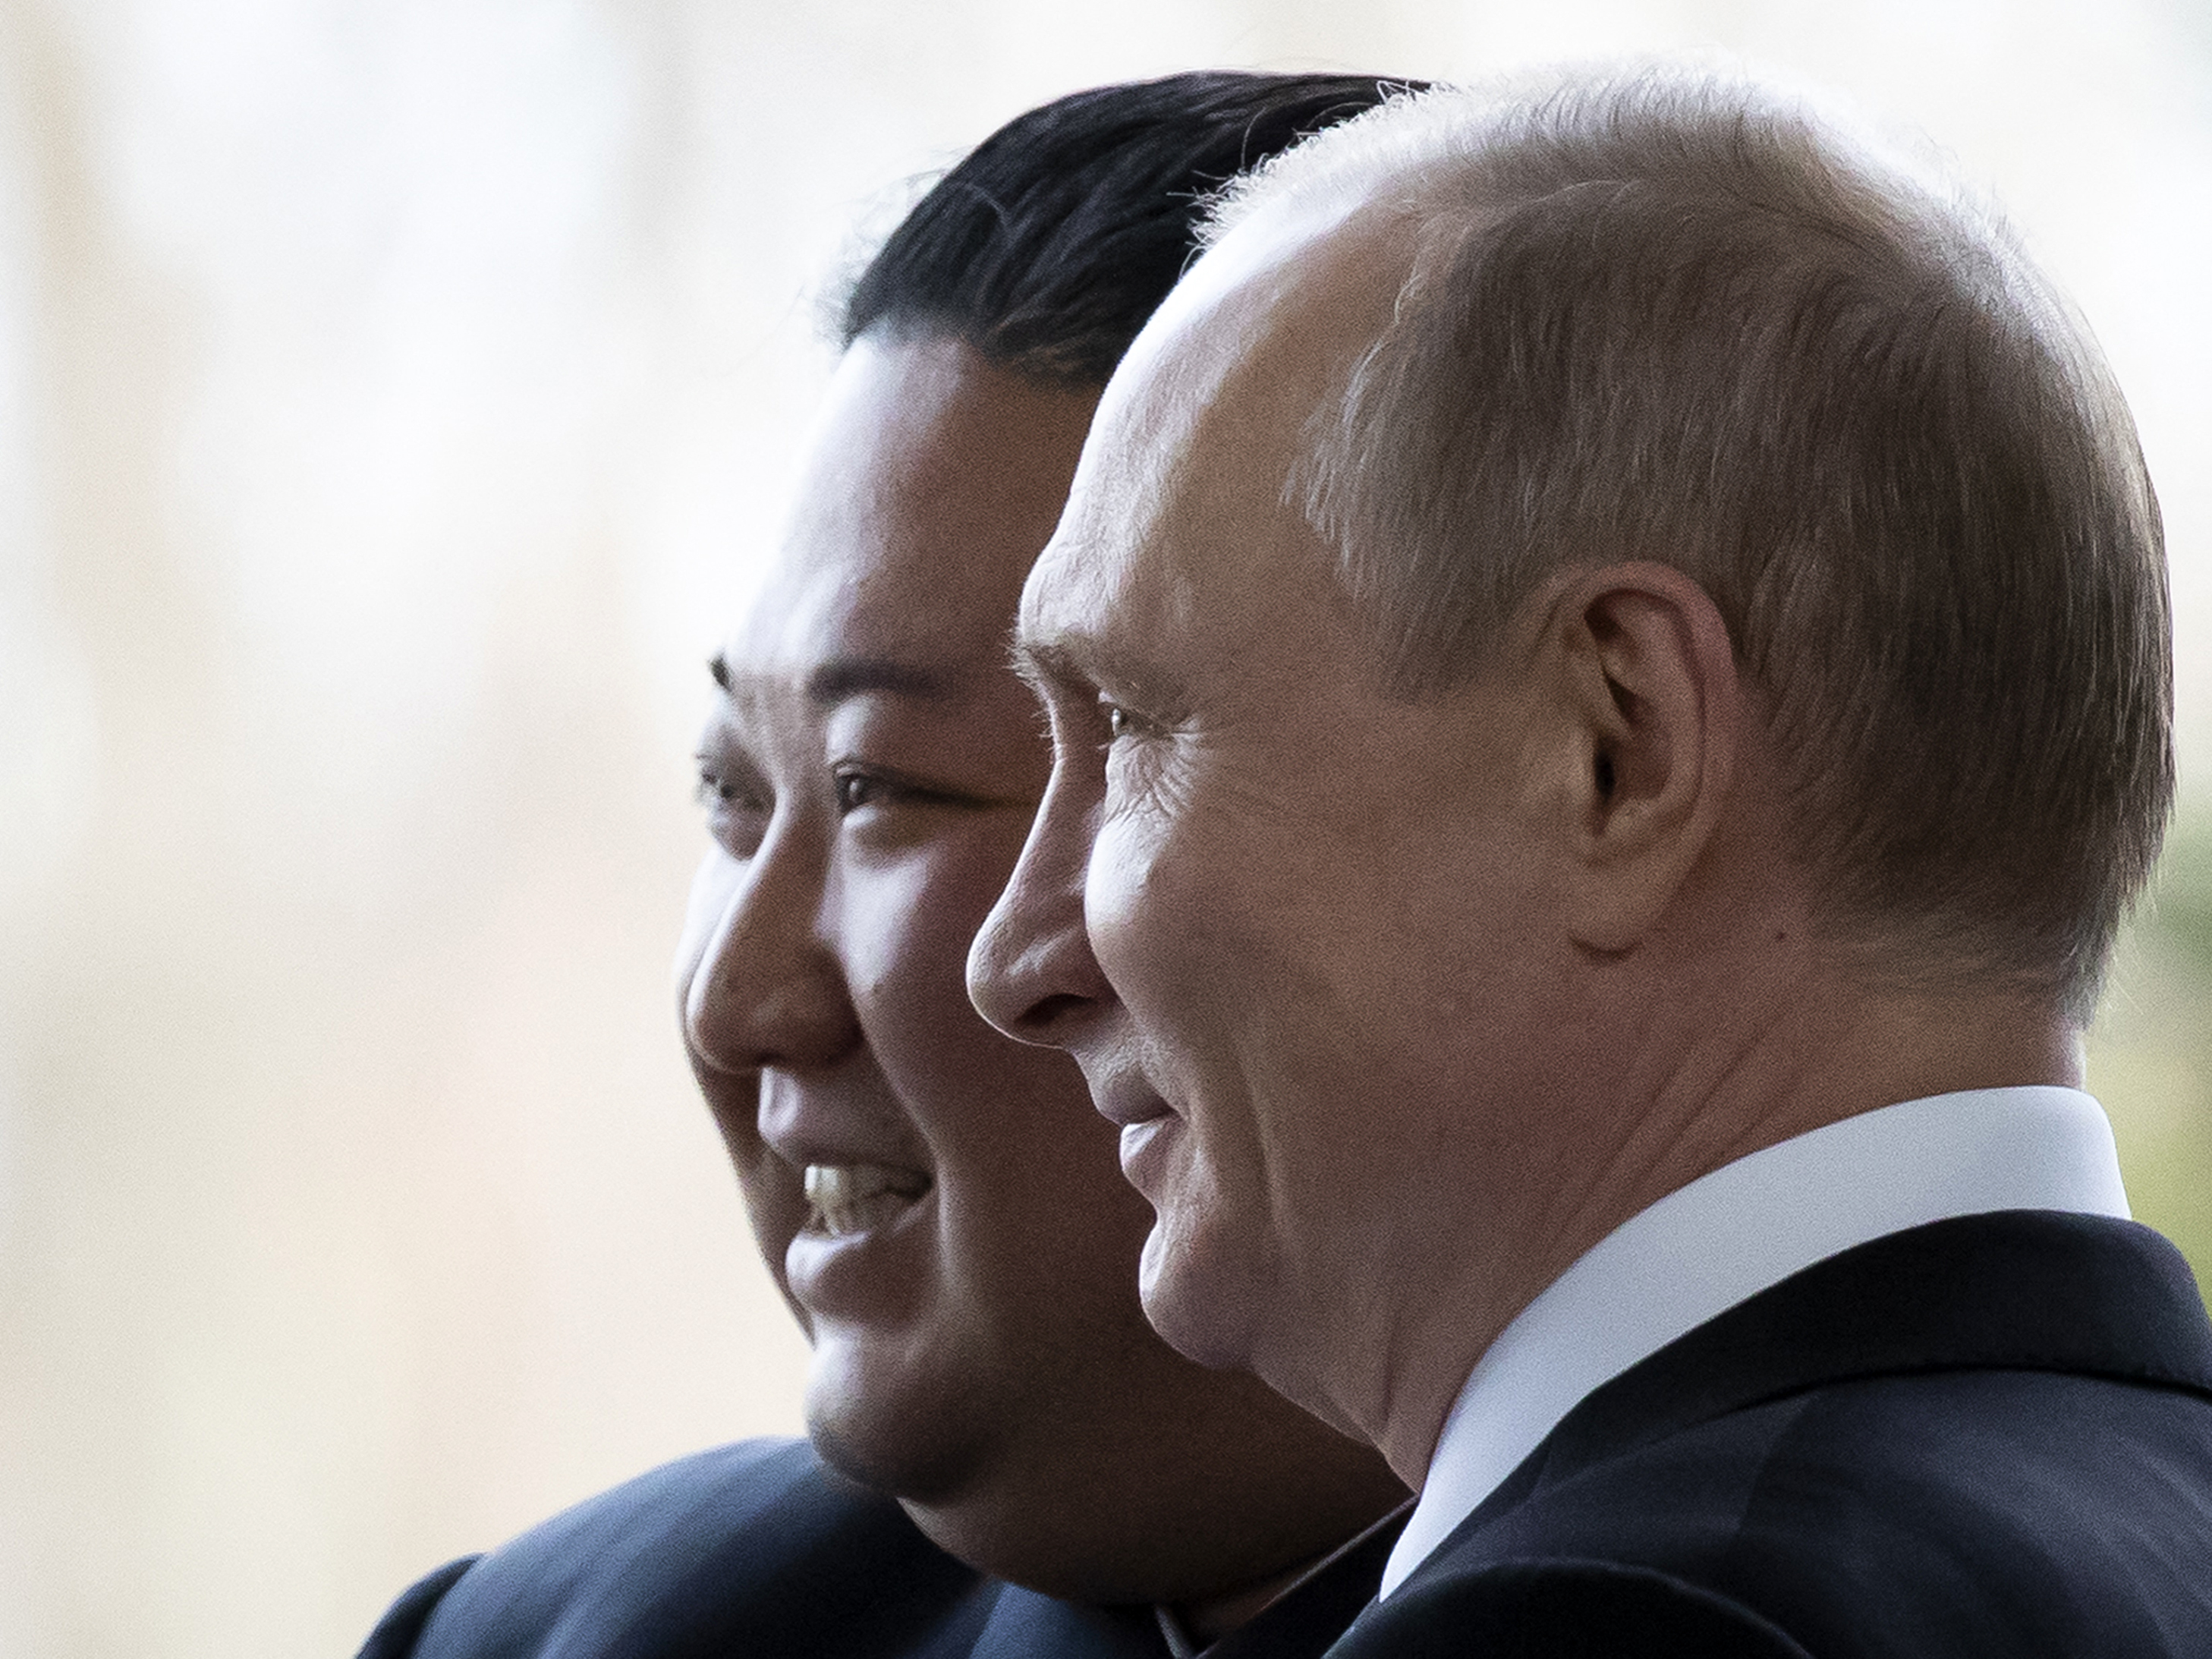 Vladimir Putin and Kim Jong Un, in profile, next to each other.